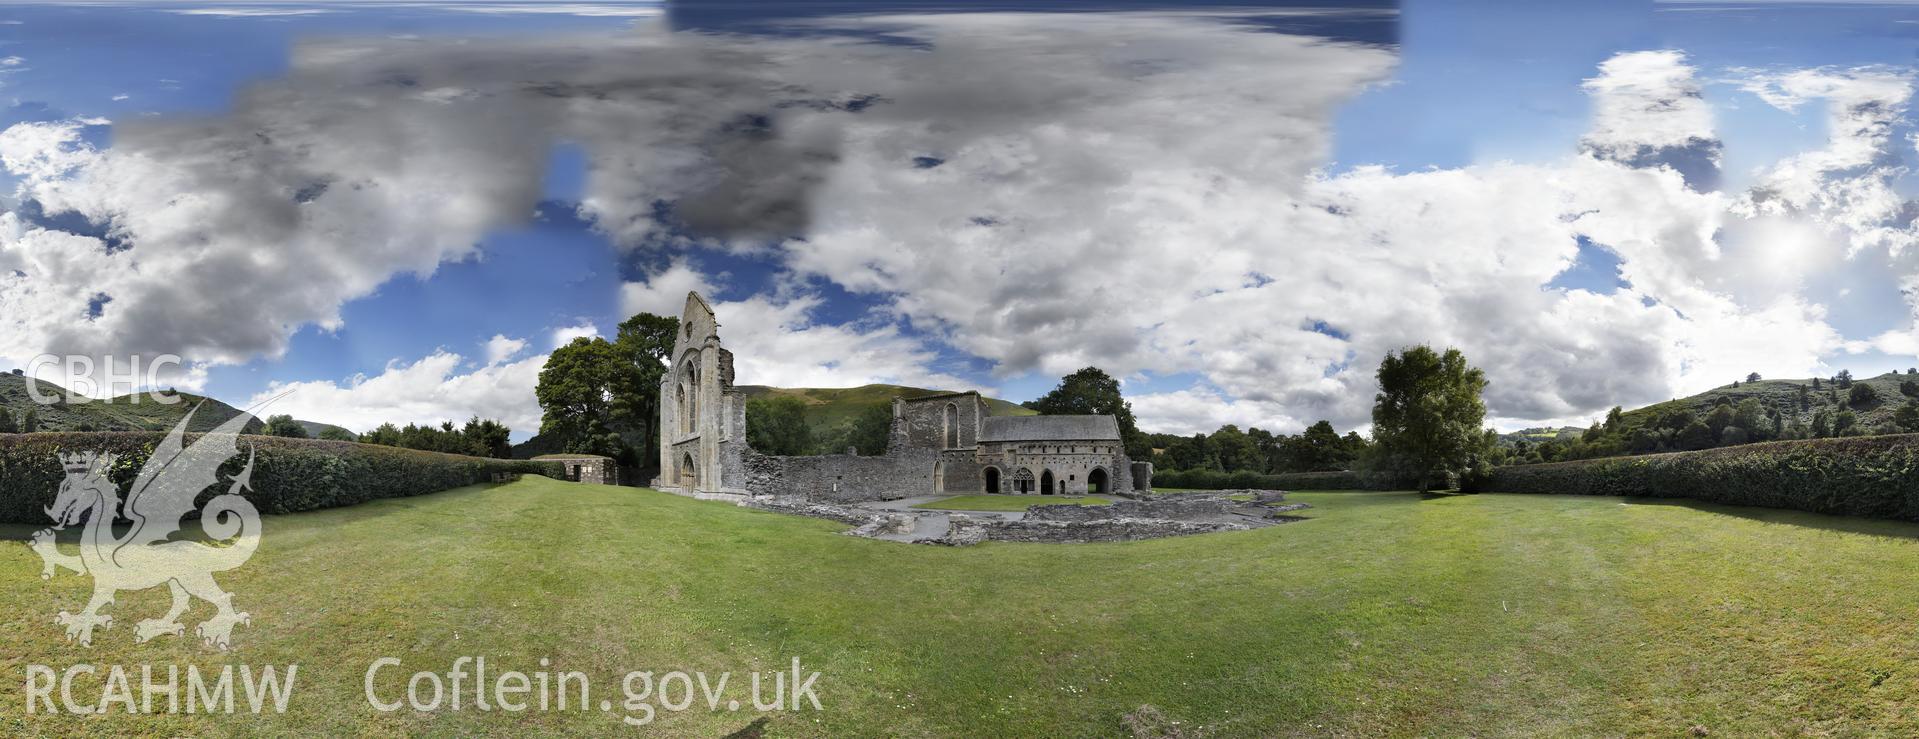 Reduced resolution .tiff file of stitched images in the cloister at Valle Crucis Abbey, carried out by Sue Fielding and Rita Singer, July 2017. Produced through European Travellers to Wales project.